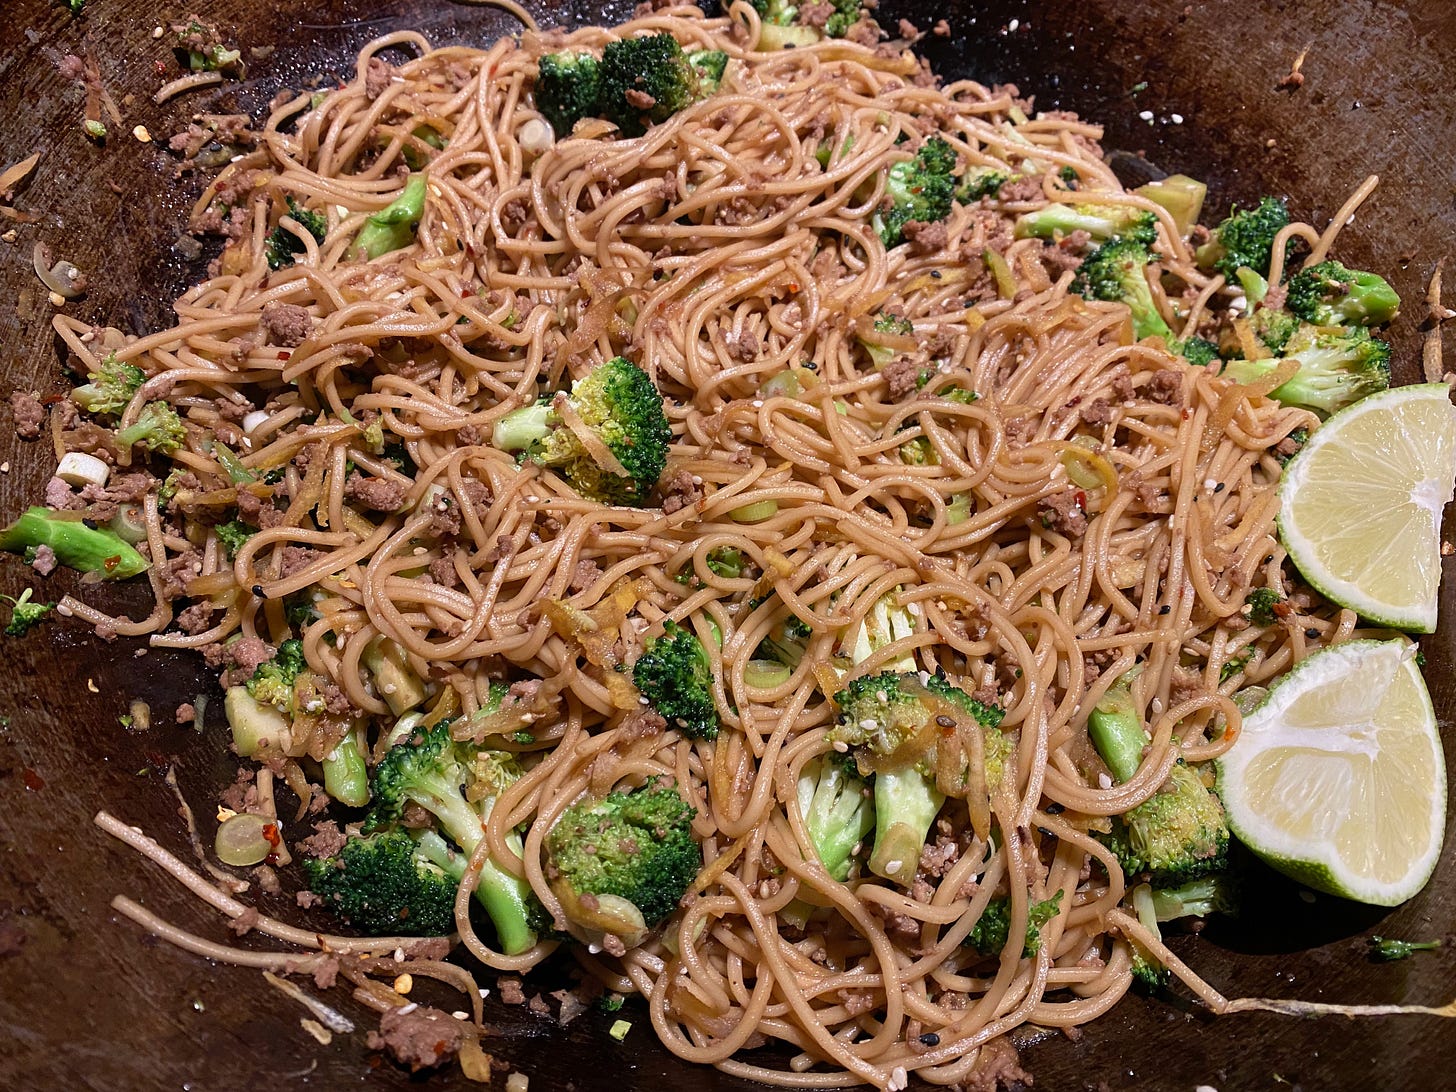 Close up of a pile of Lo mein noodles, ground pork, and broccoli florets in a wok. Two slices of lime are visible on the edge of the photo.